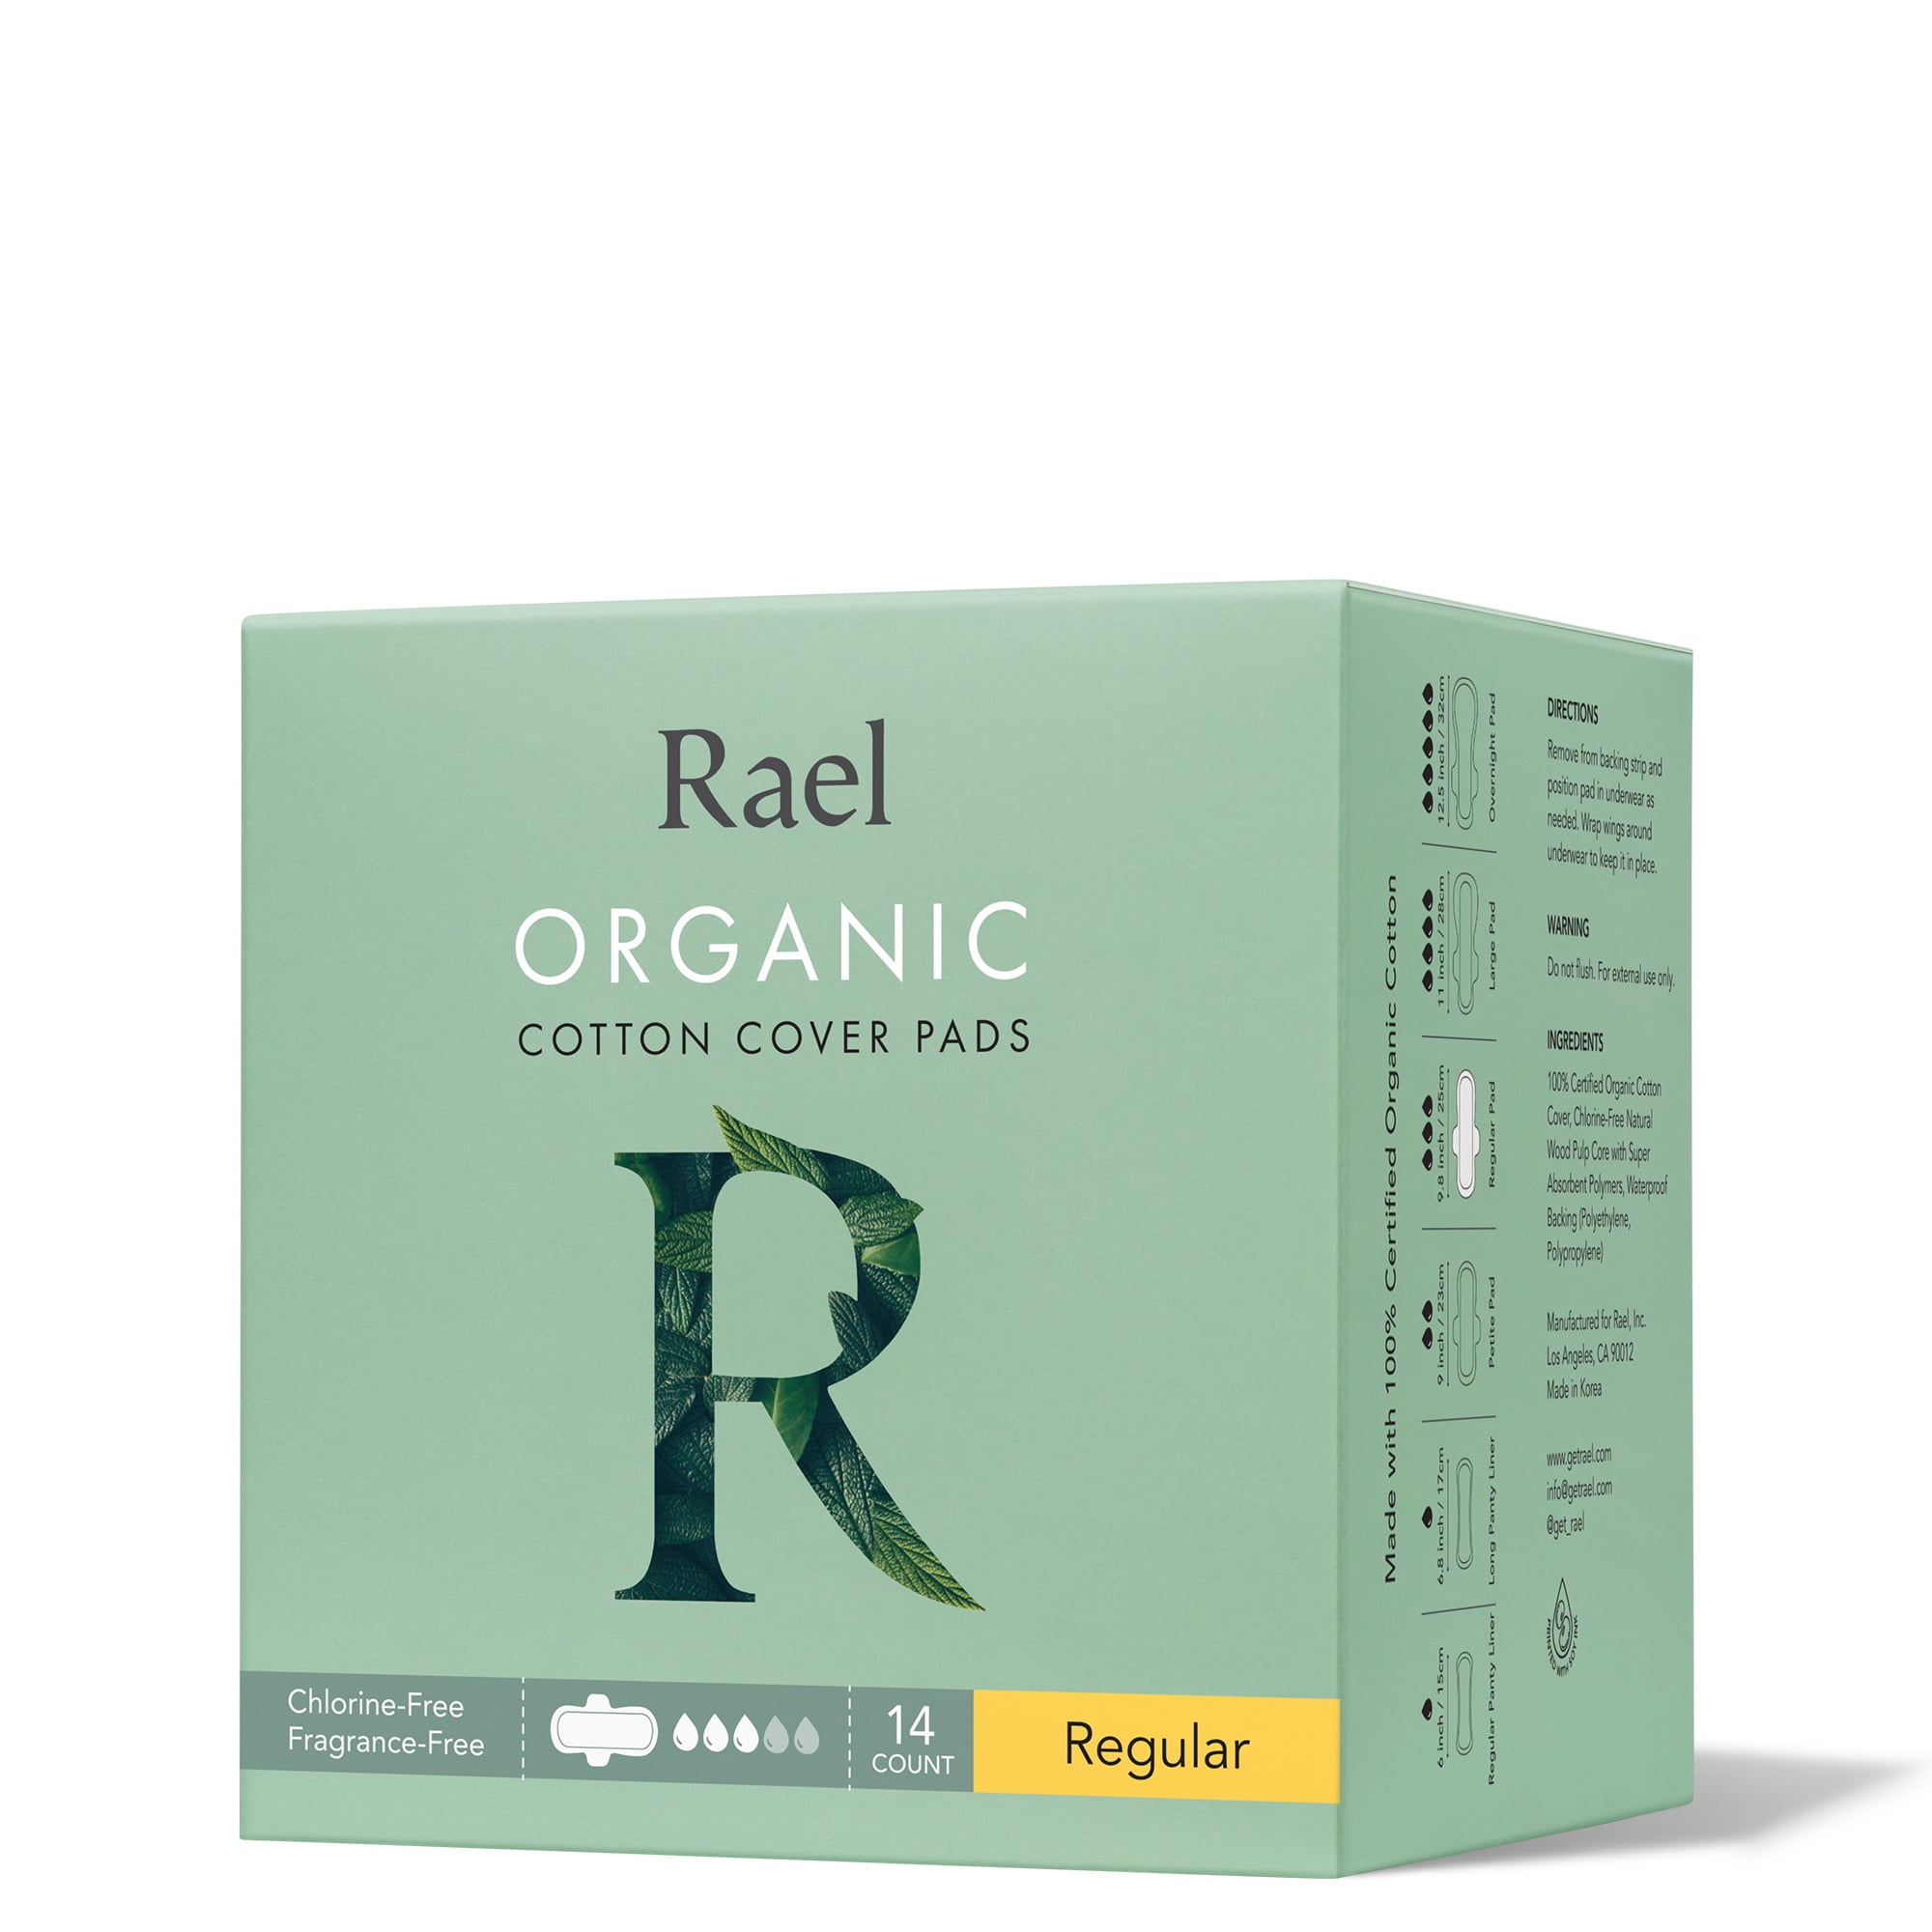 Wholesale Rael Organic Cotton Cover Pads - Petite for your store